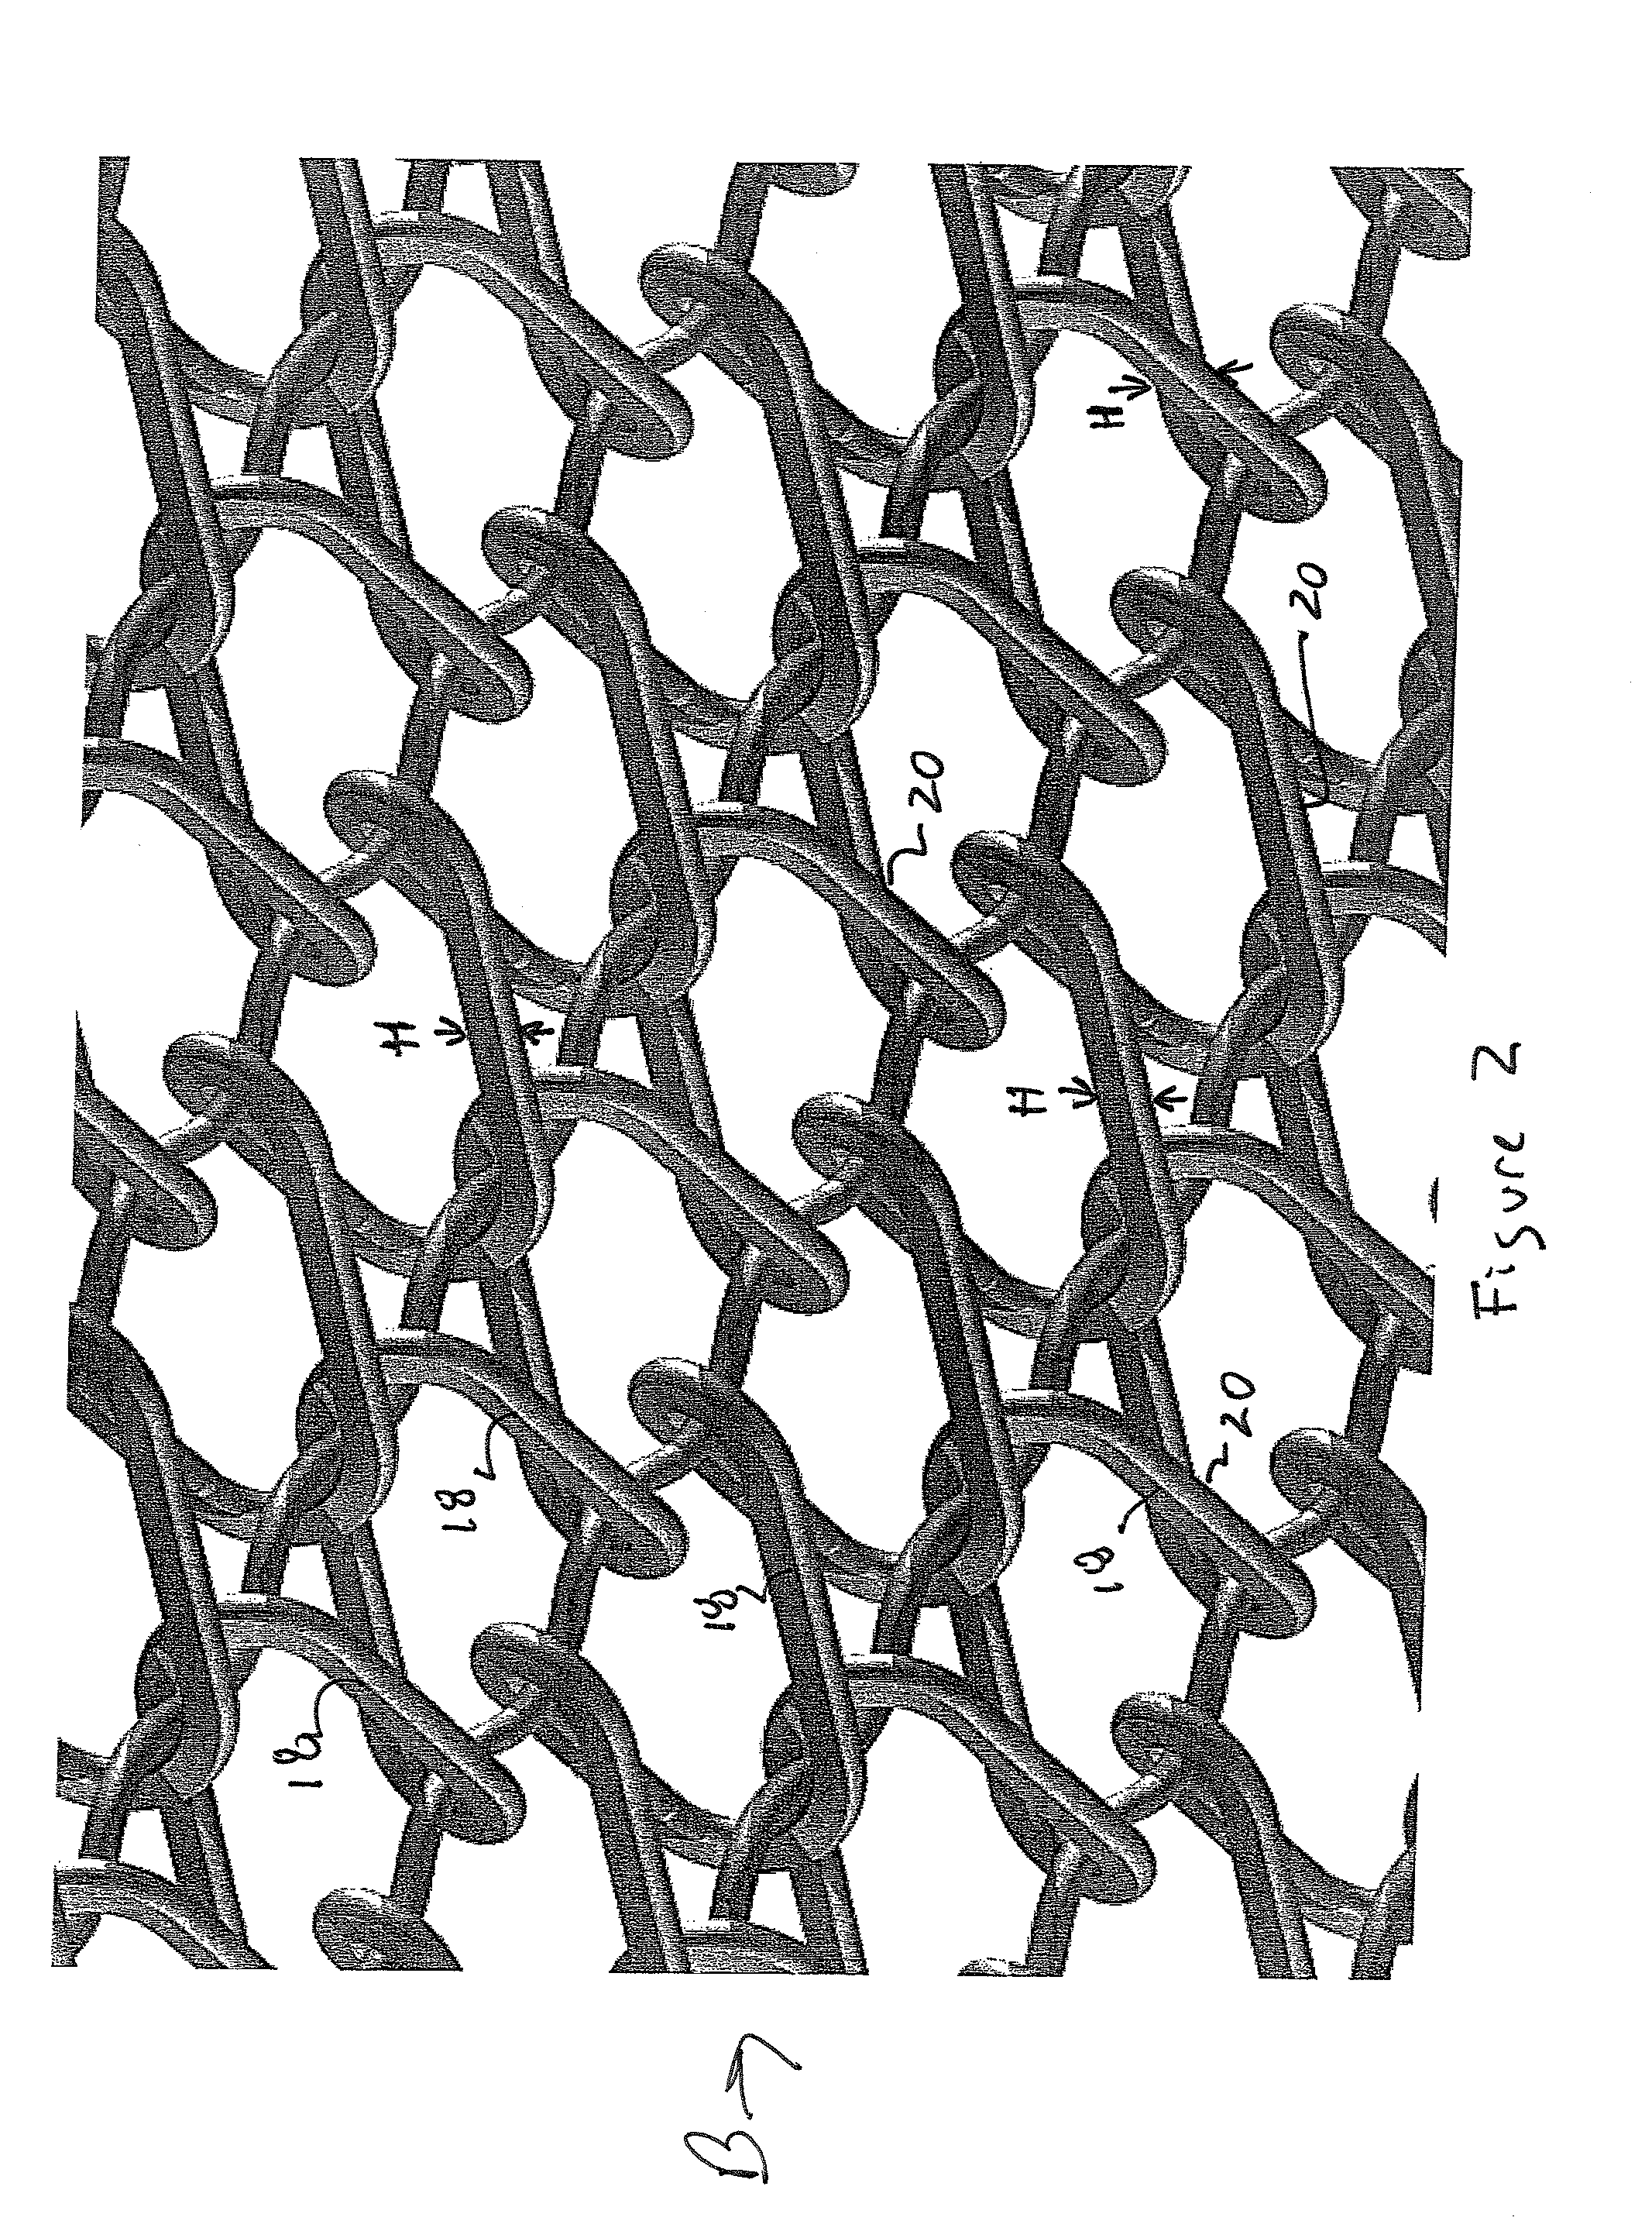 Woven wire conveyor belt and a method of forming the same